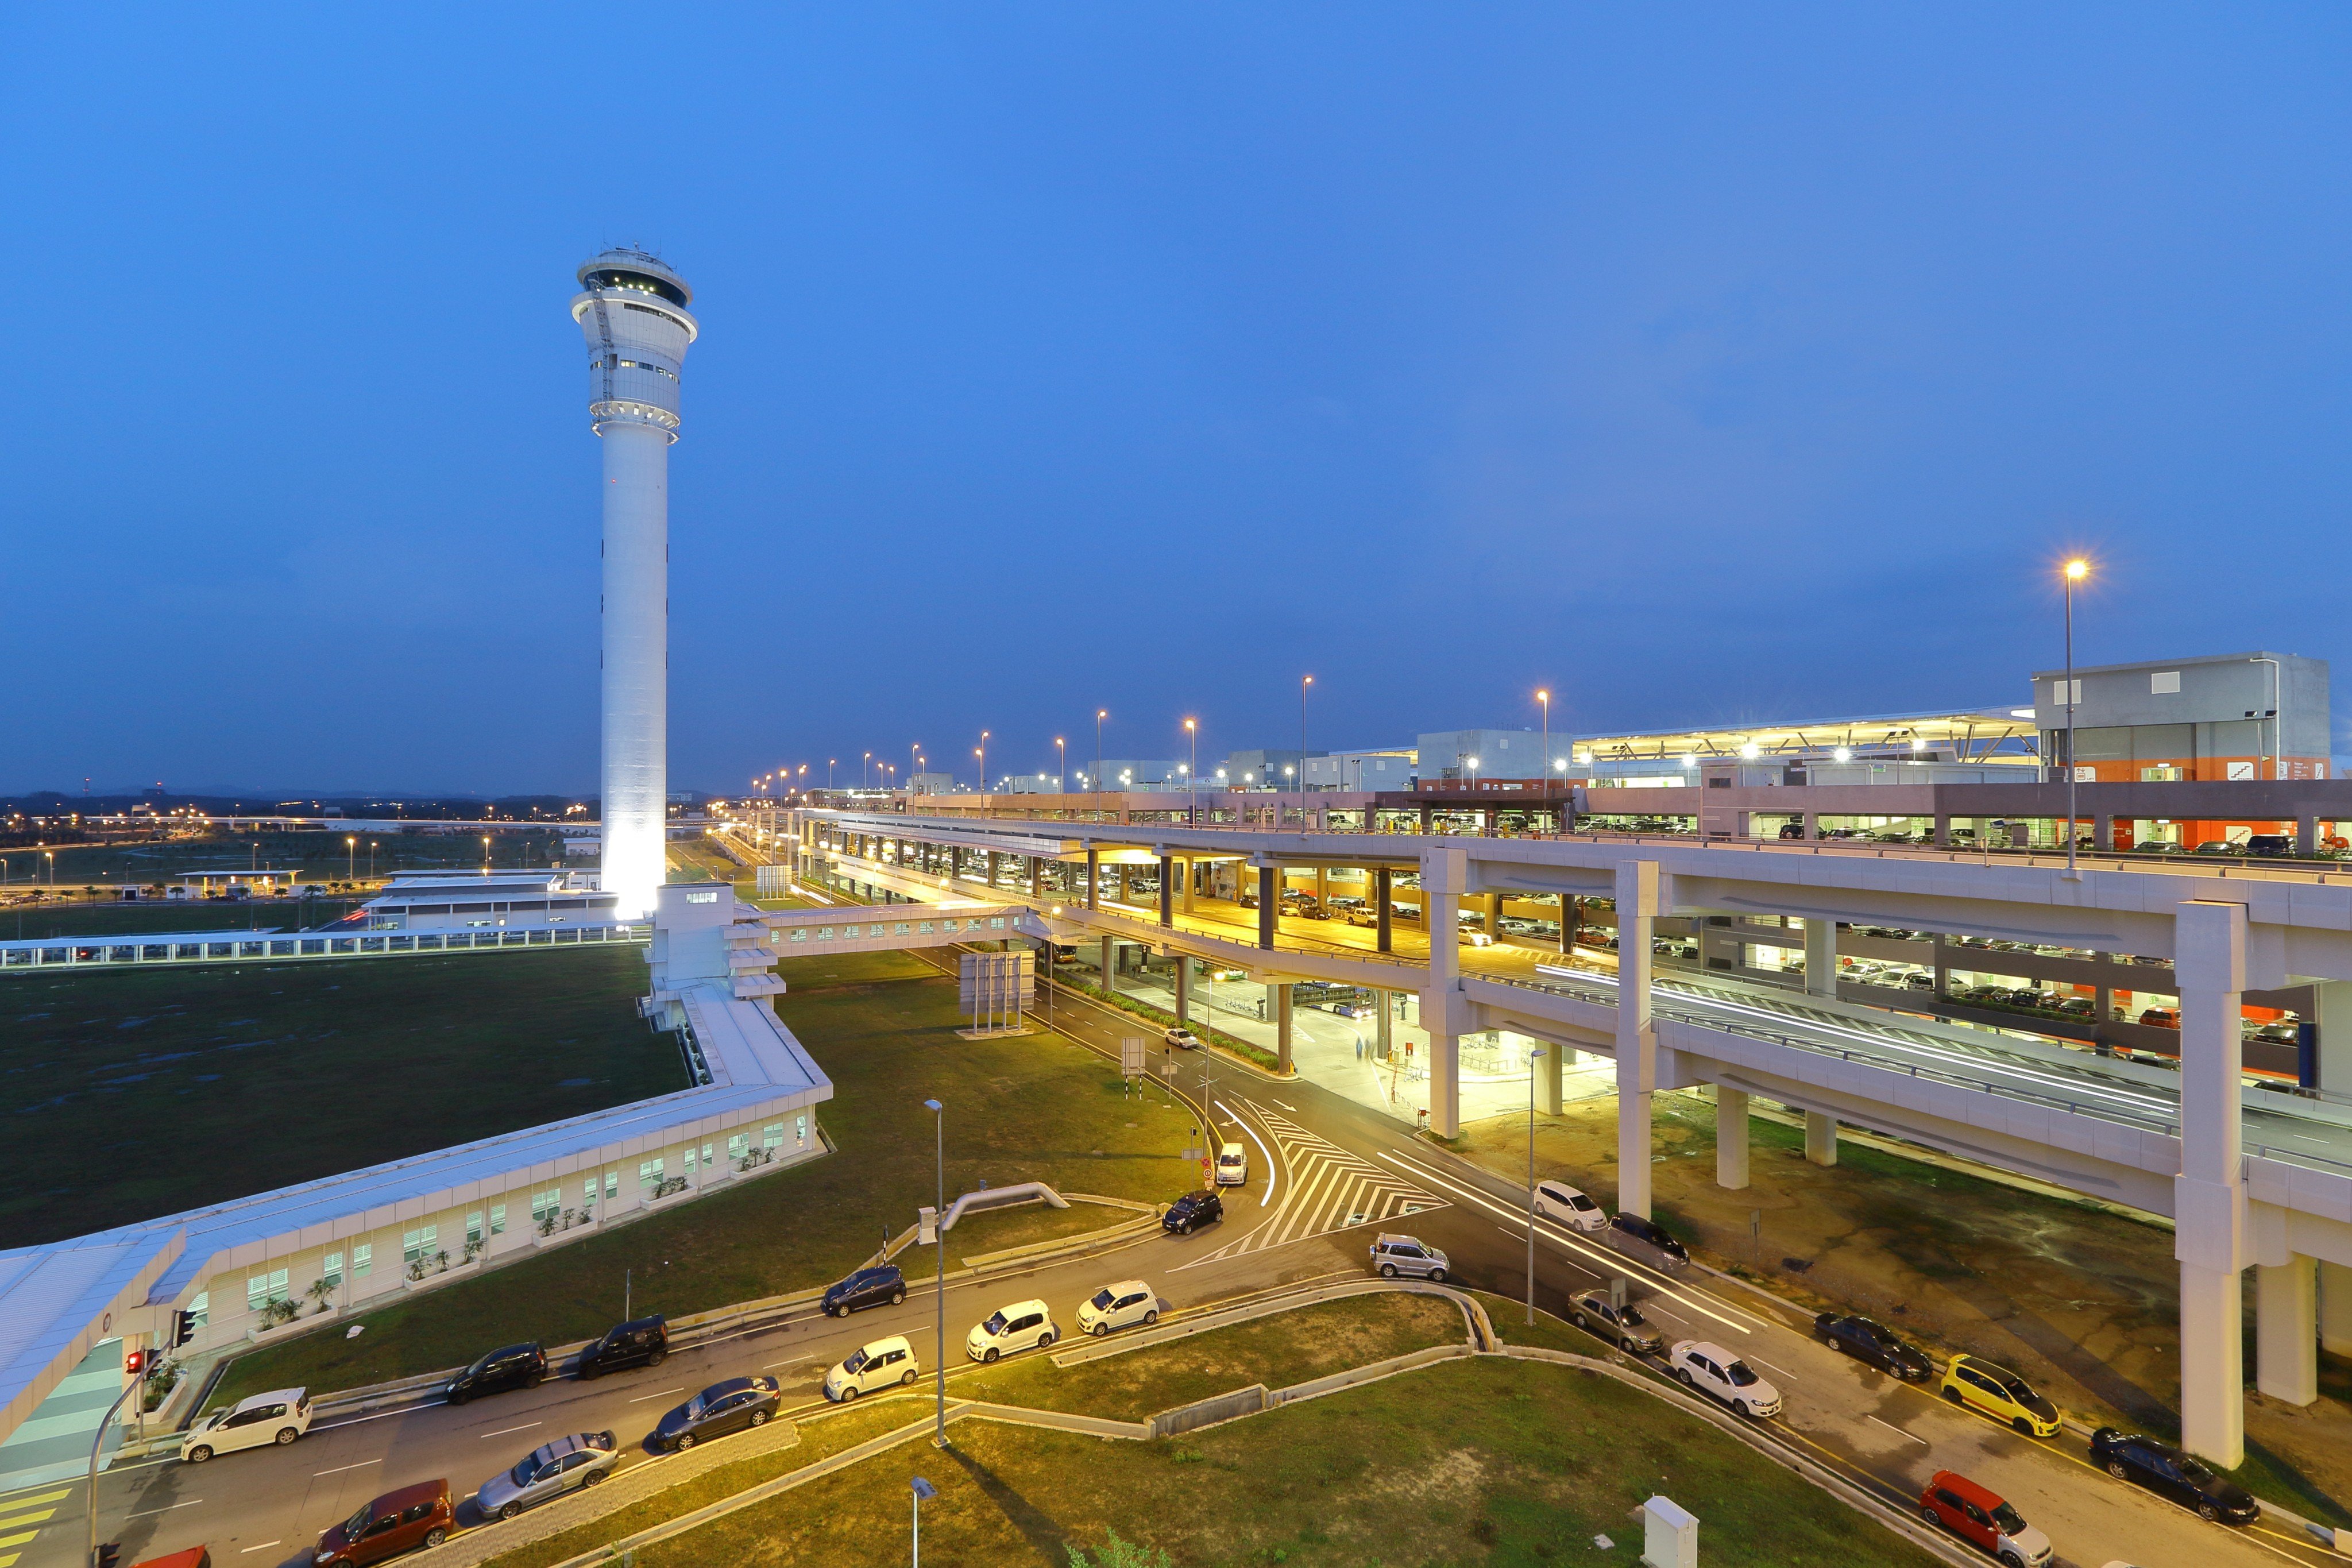 Malaysia’s Selangor state has multiple points of global connectivity, including Kuala Lumpur International Airport. 

